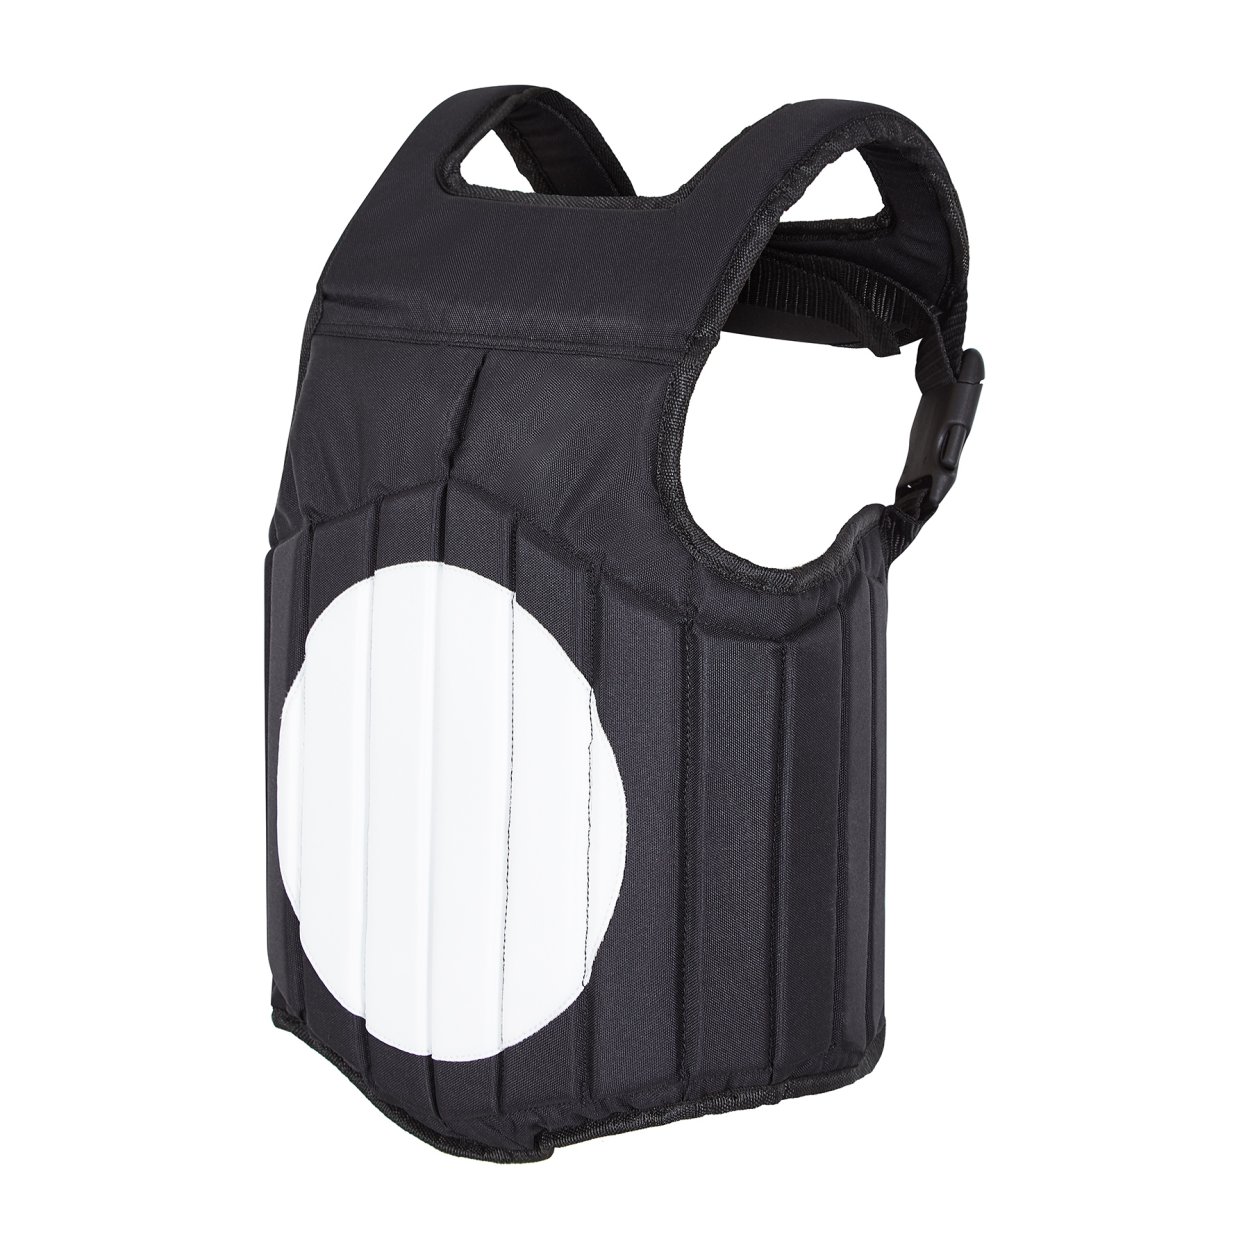 Deluxe Childrens Martial Arts Body Armour - Click Image to Close